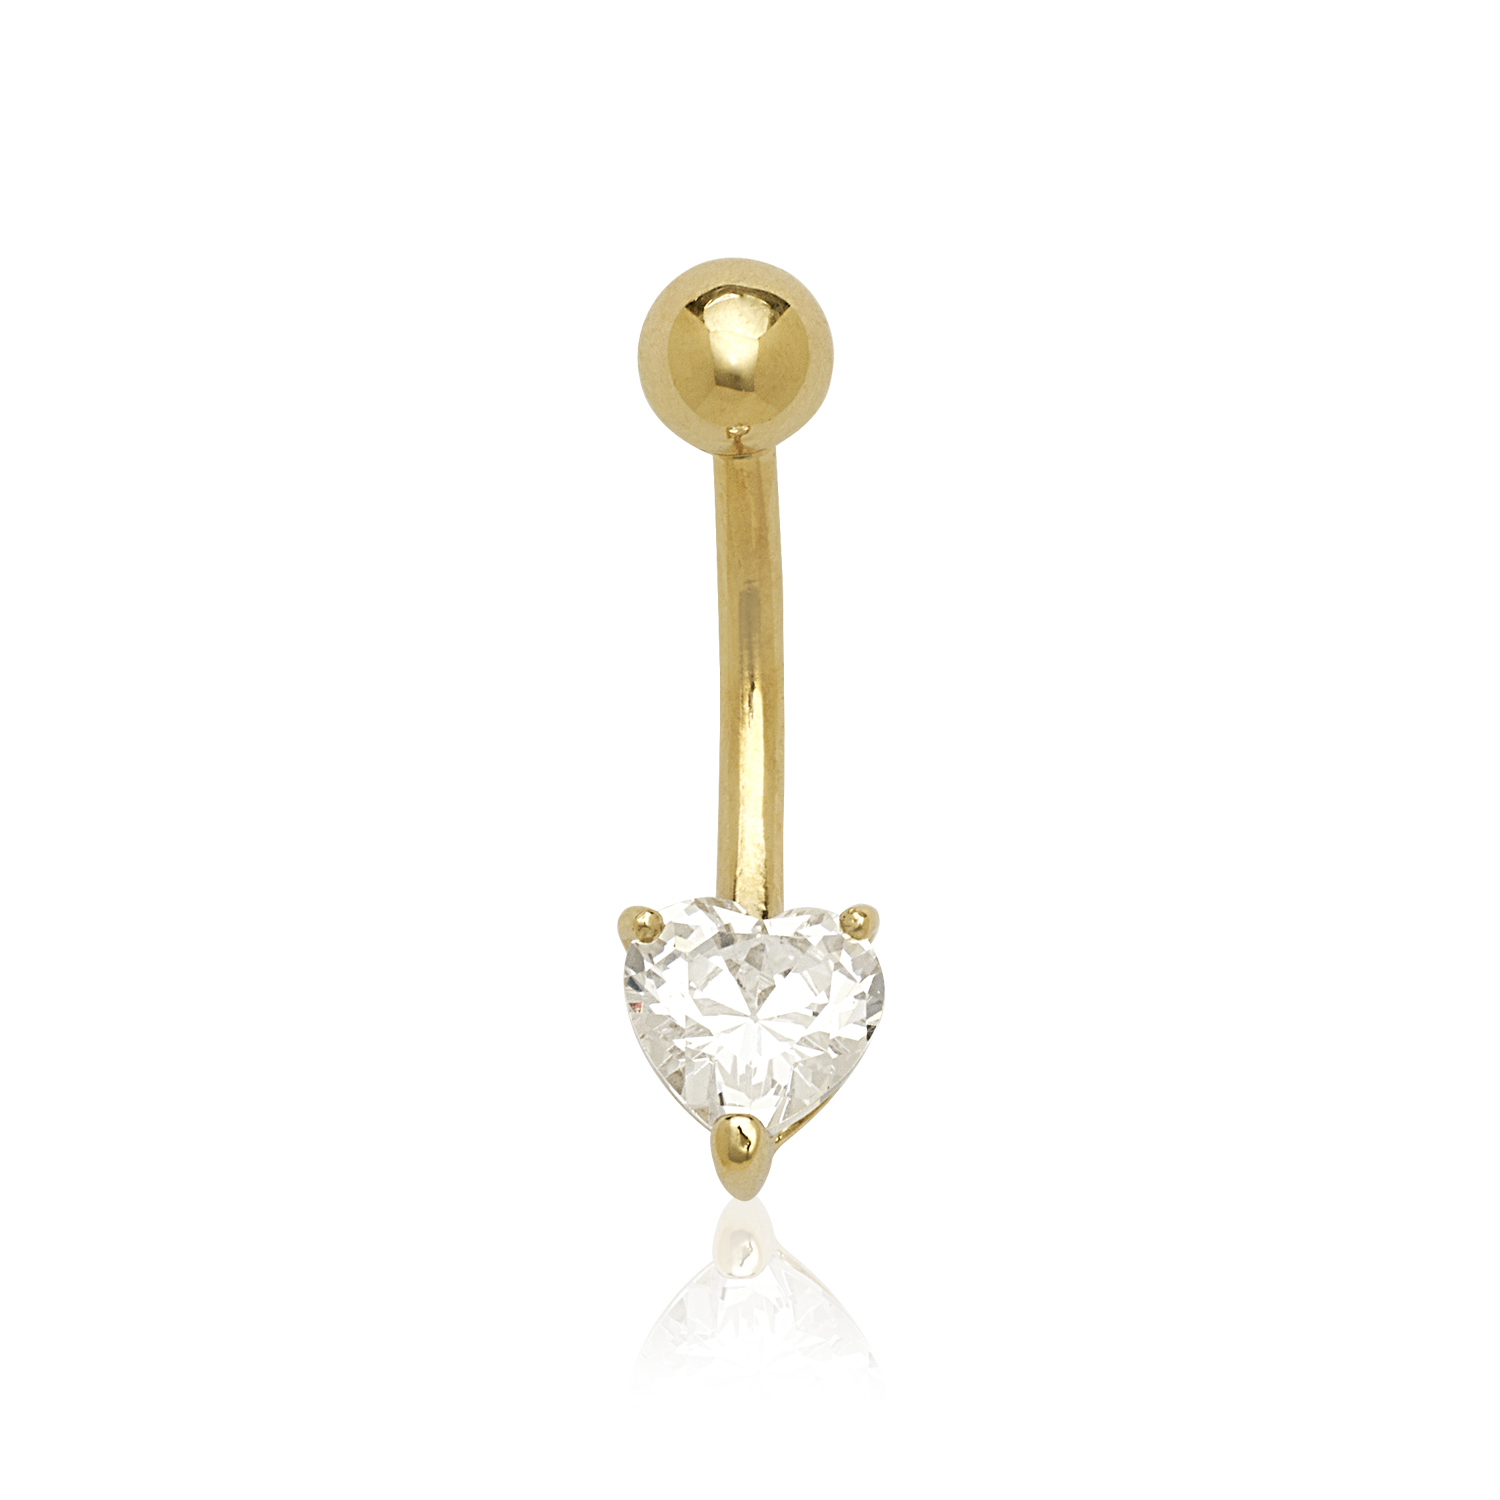 Jewelryweb 14k Yellow Gold Cubic Zirconia 14 Gauge Heart Shaped Body Jewelry Belly Ring - Measures 23x6mm